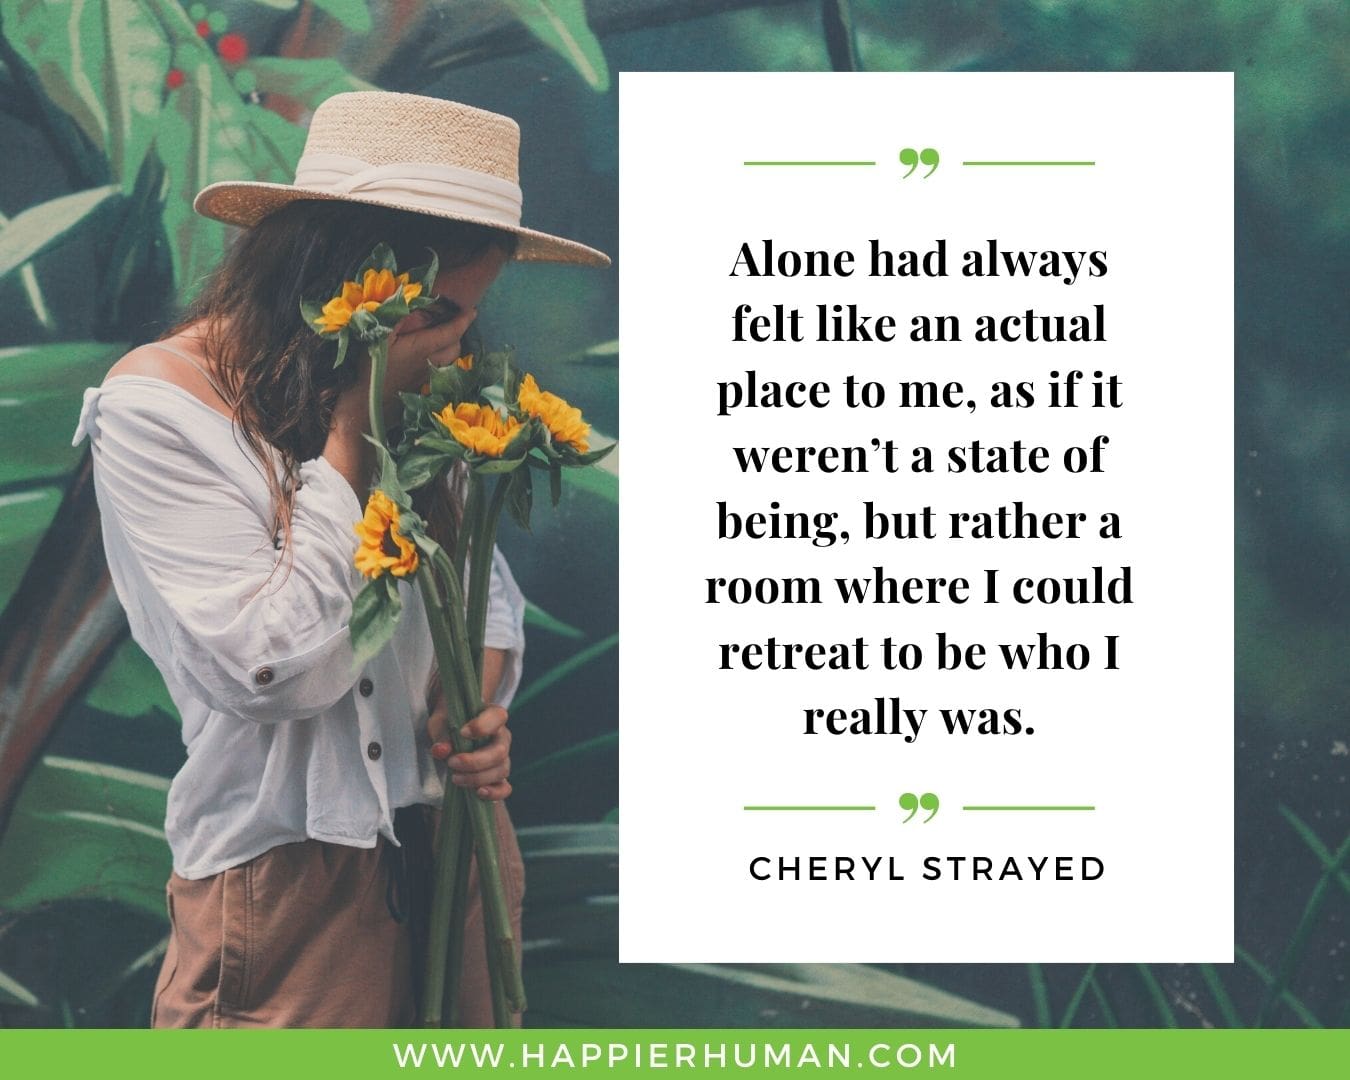 Introvert Quotes - “Alone had always felt like an actual place to me, as if it weren’t a state of being, but rather a room where I could retreat to be who I really was.” – Cheryl Strayed